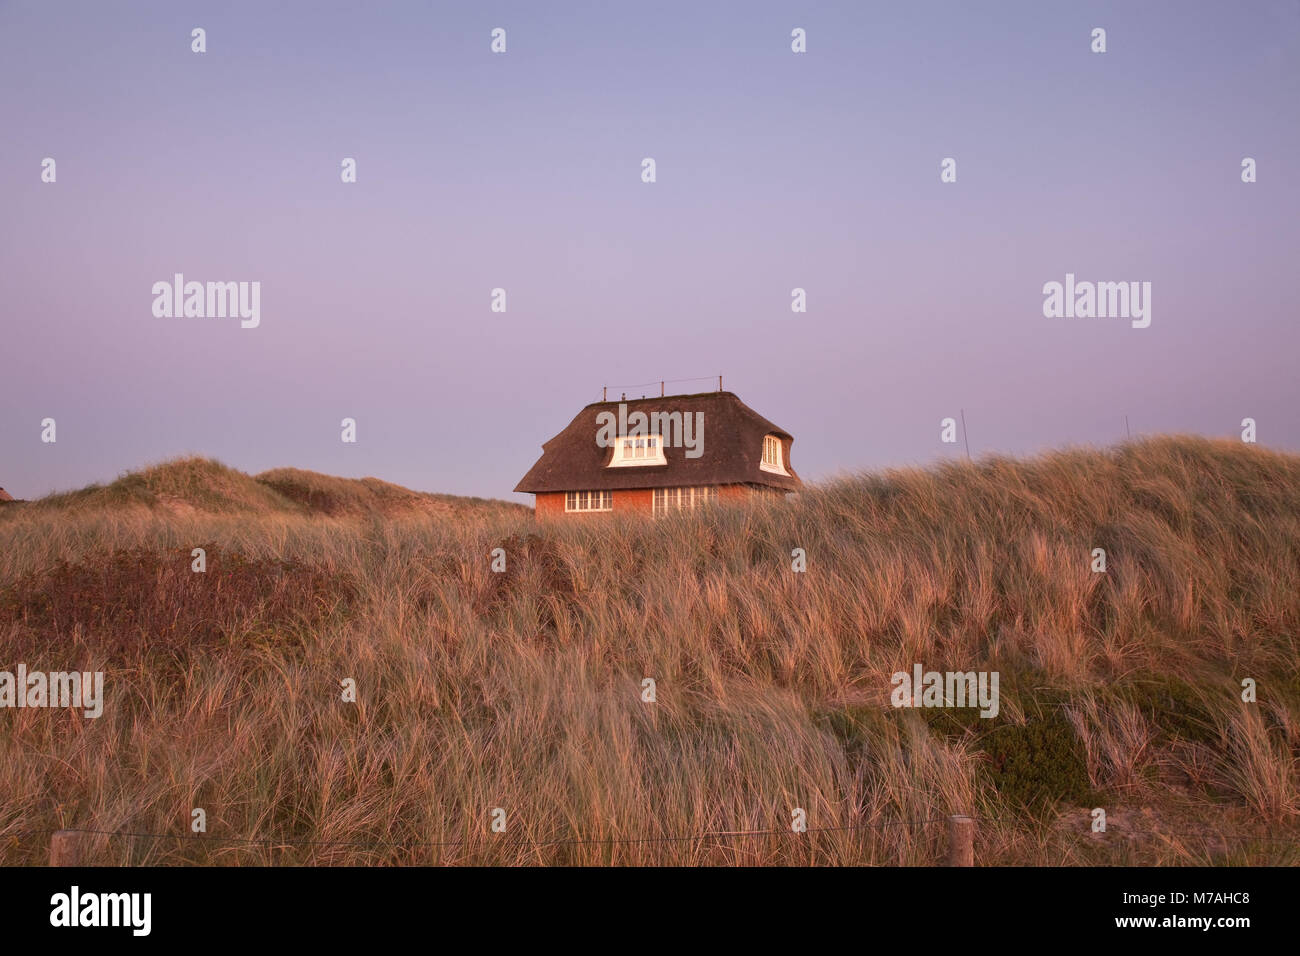 Thatched-roof houses in the dunes in Hörnum, island Sylt, Schleswig - Holstein, Germany, Stock Photo